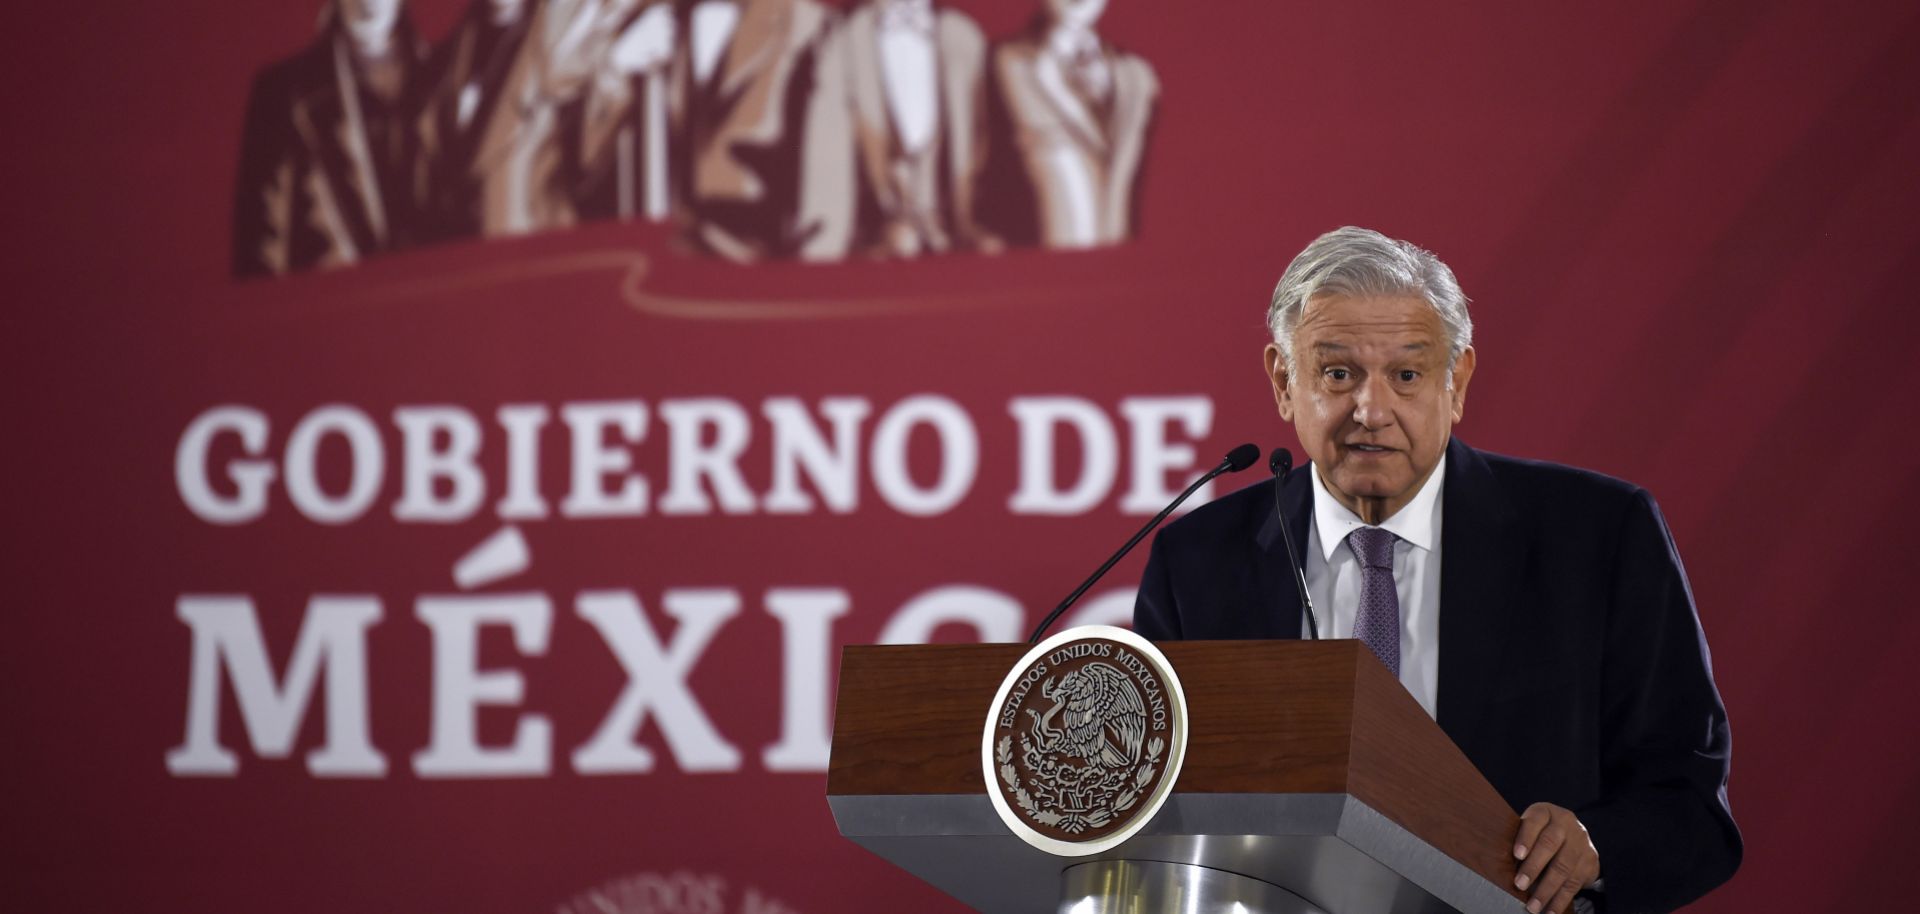 Mexican President Andres Manuel Lopez Obrador answers questions during a news conference in Mexico City on Dec. 14, 2018.